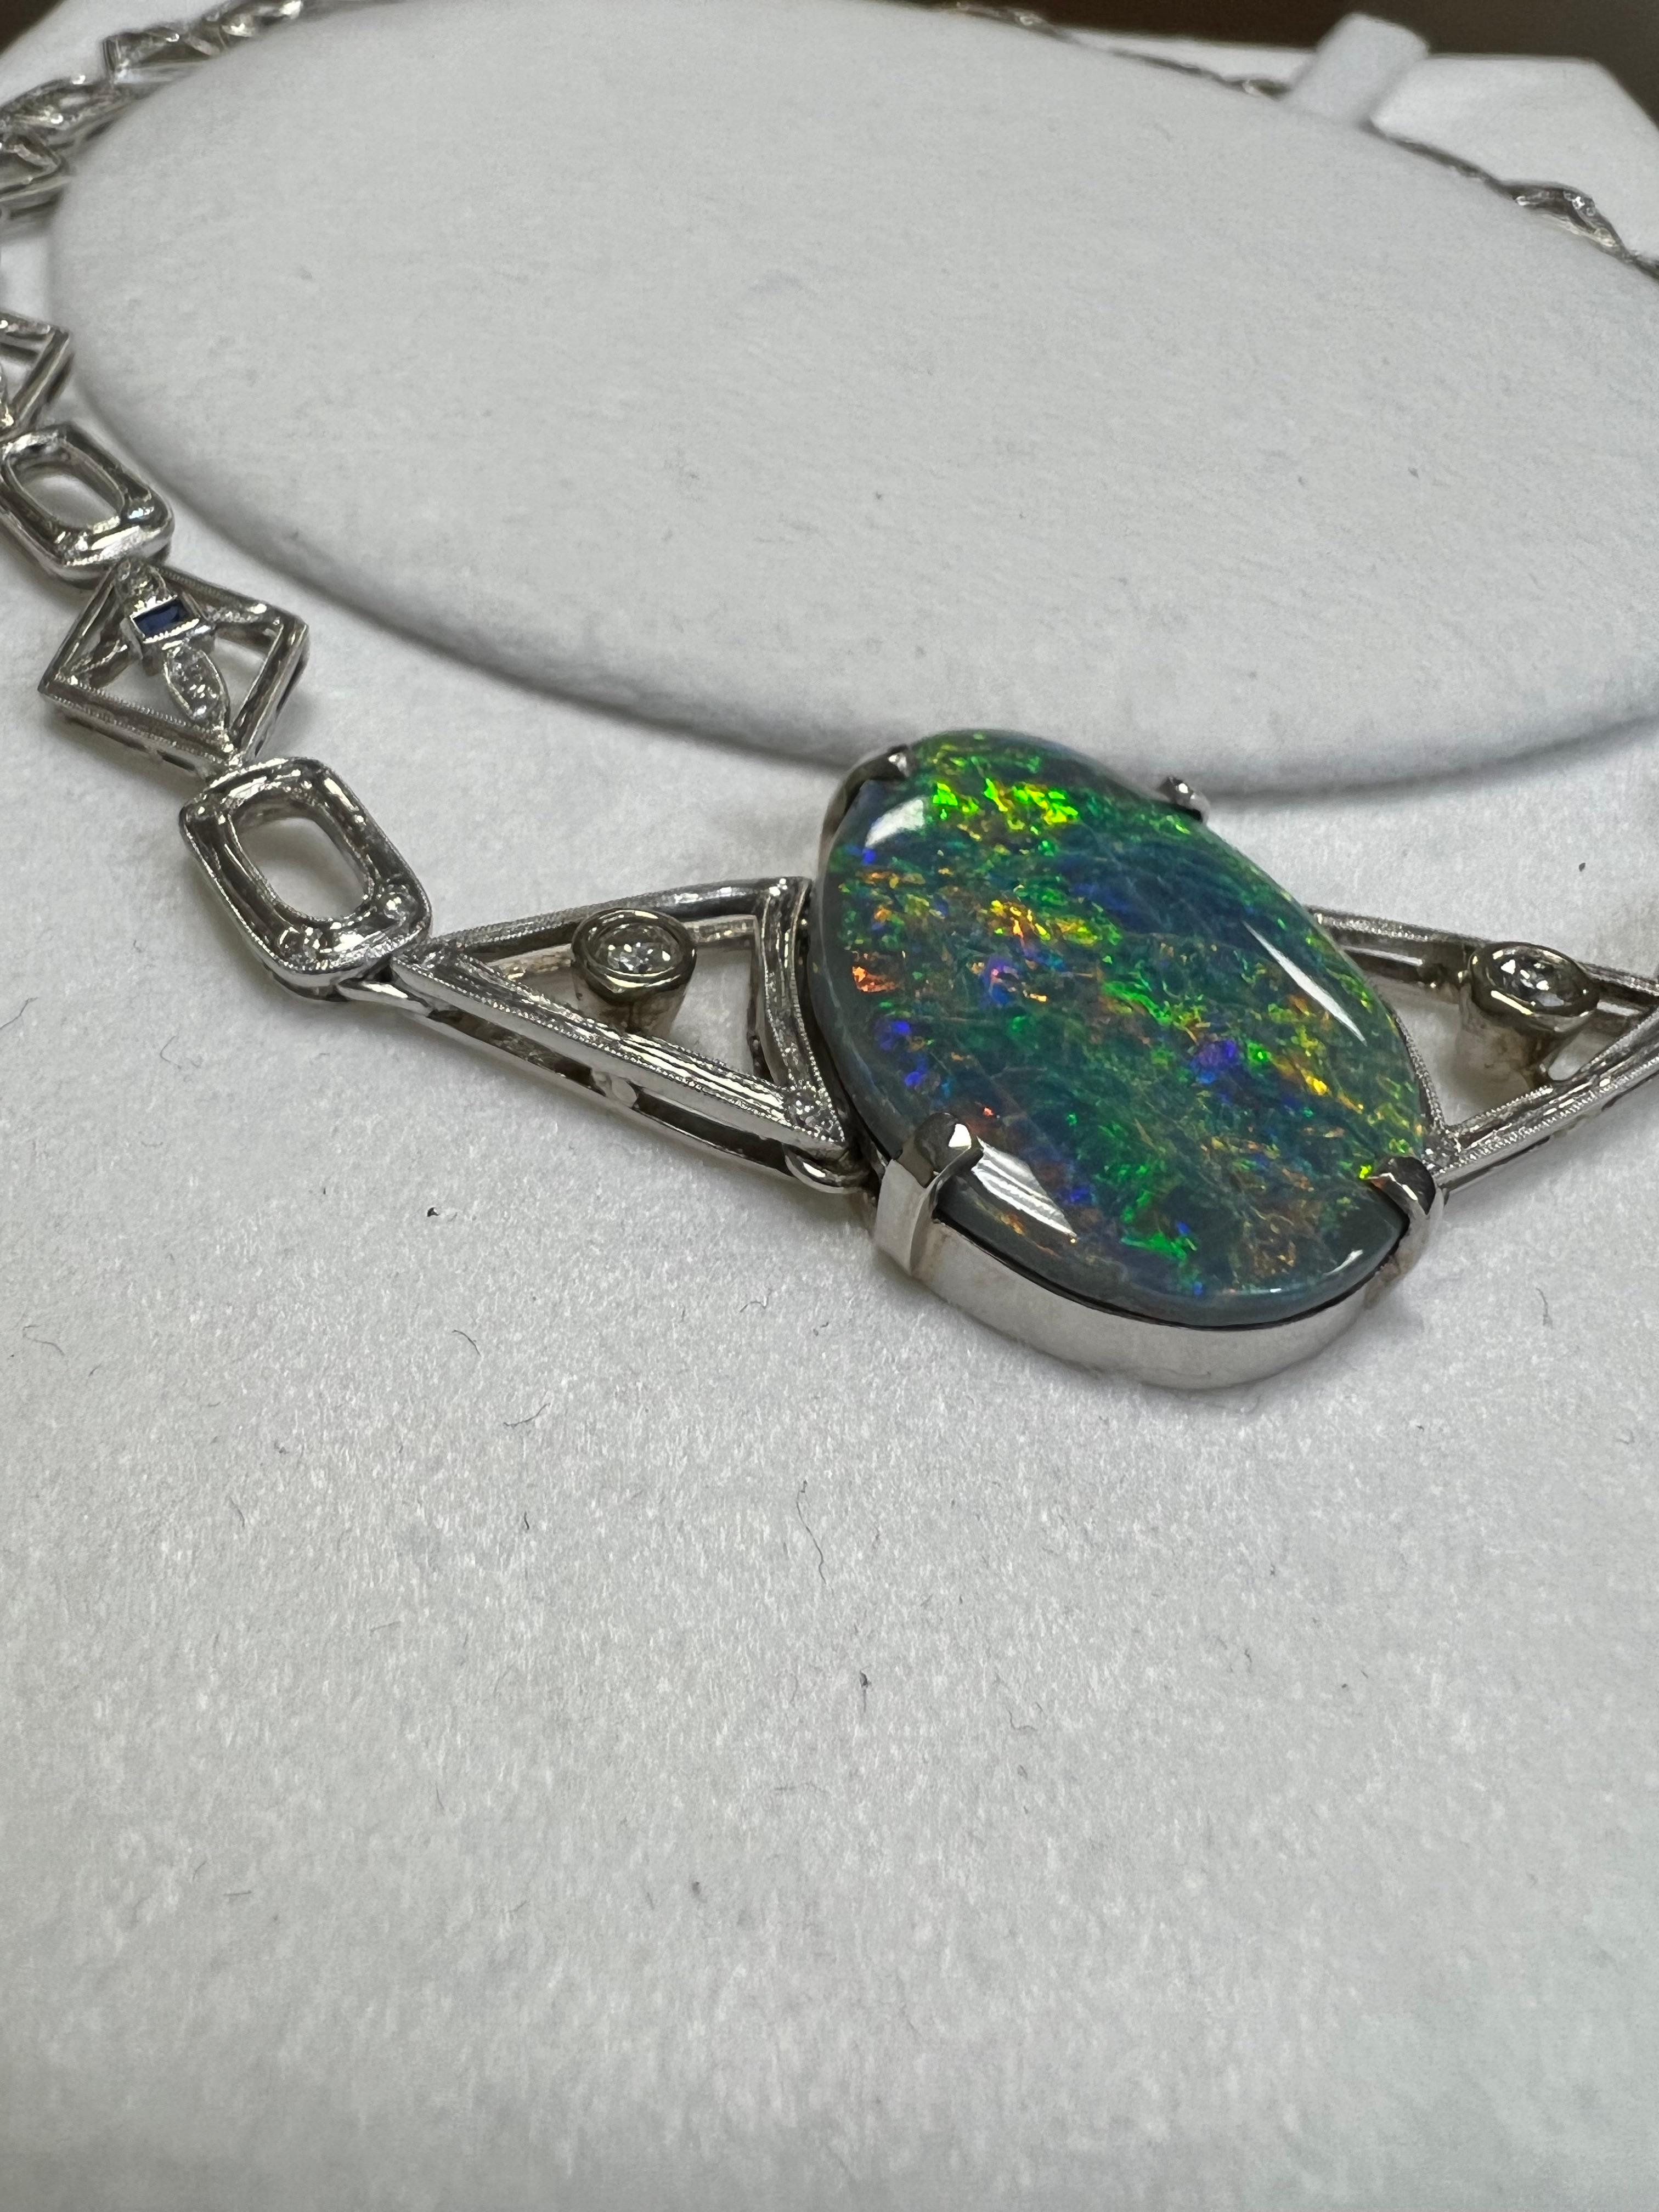 One lady's black opal with a multi-color fire color. Average saturation scale with flash fire pattern. Brightness of fire is bright with cabochon, oval shape. Condition is crazed. Measurements are 33.75 x 22.0 mm. Weight is 32 carats. 106 round